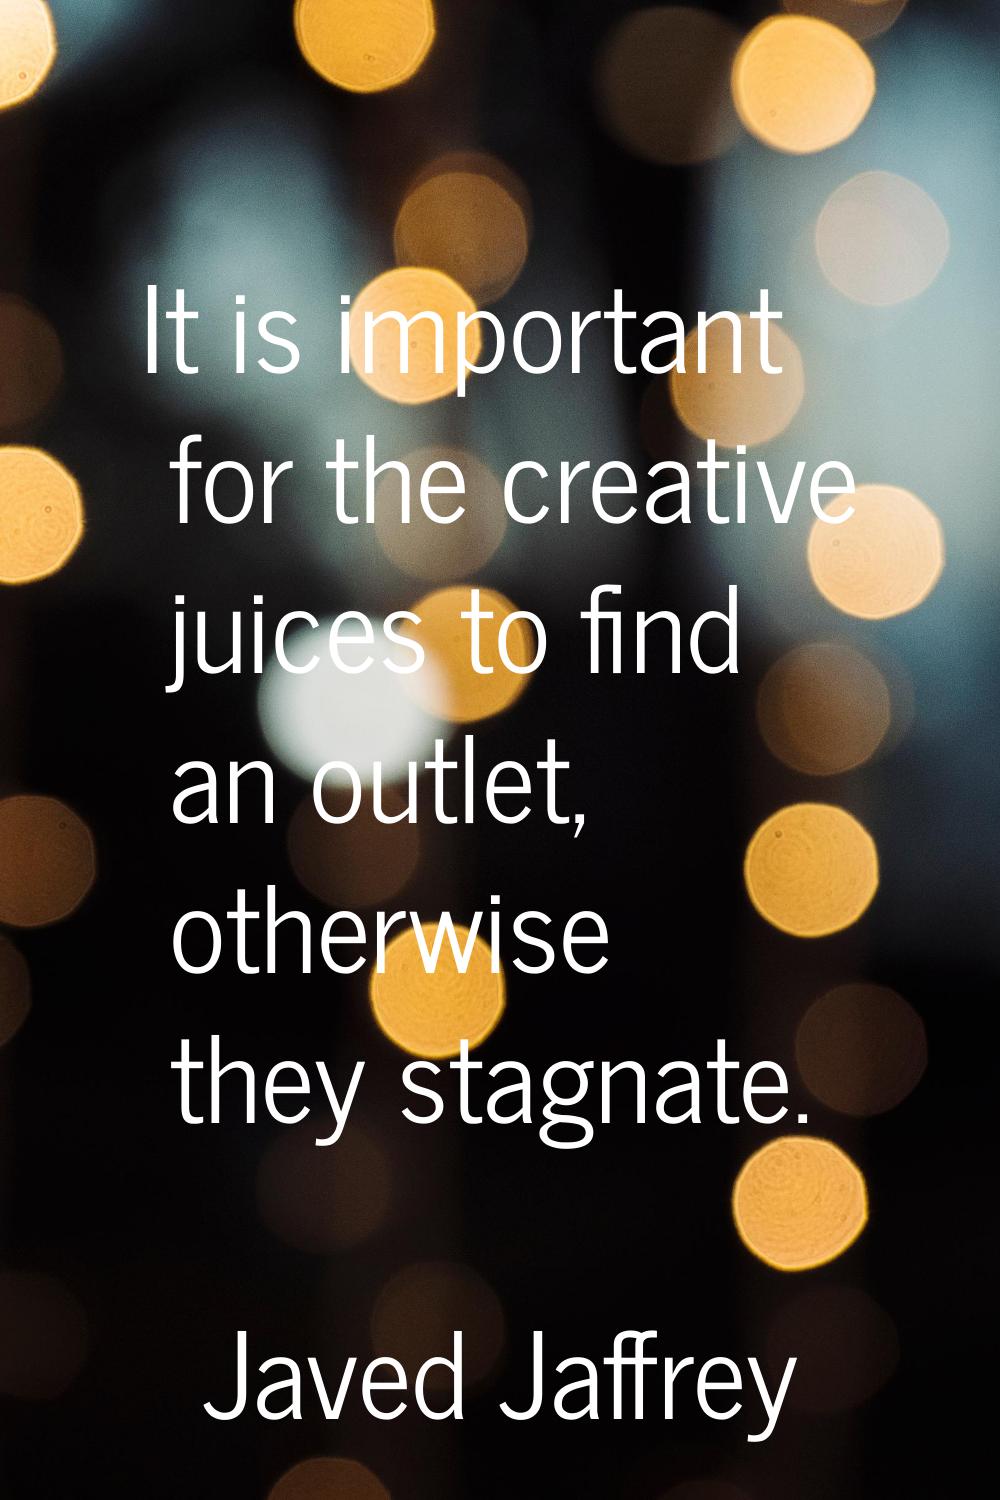 It is important for the creative juices to find an outlet, otherwise they stagnate.